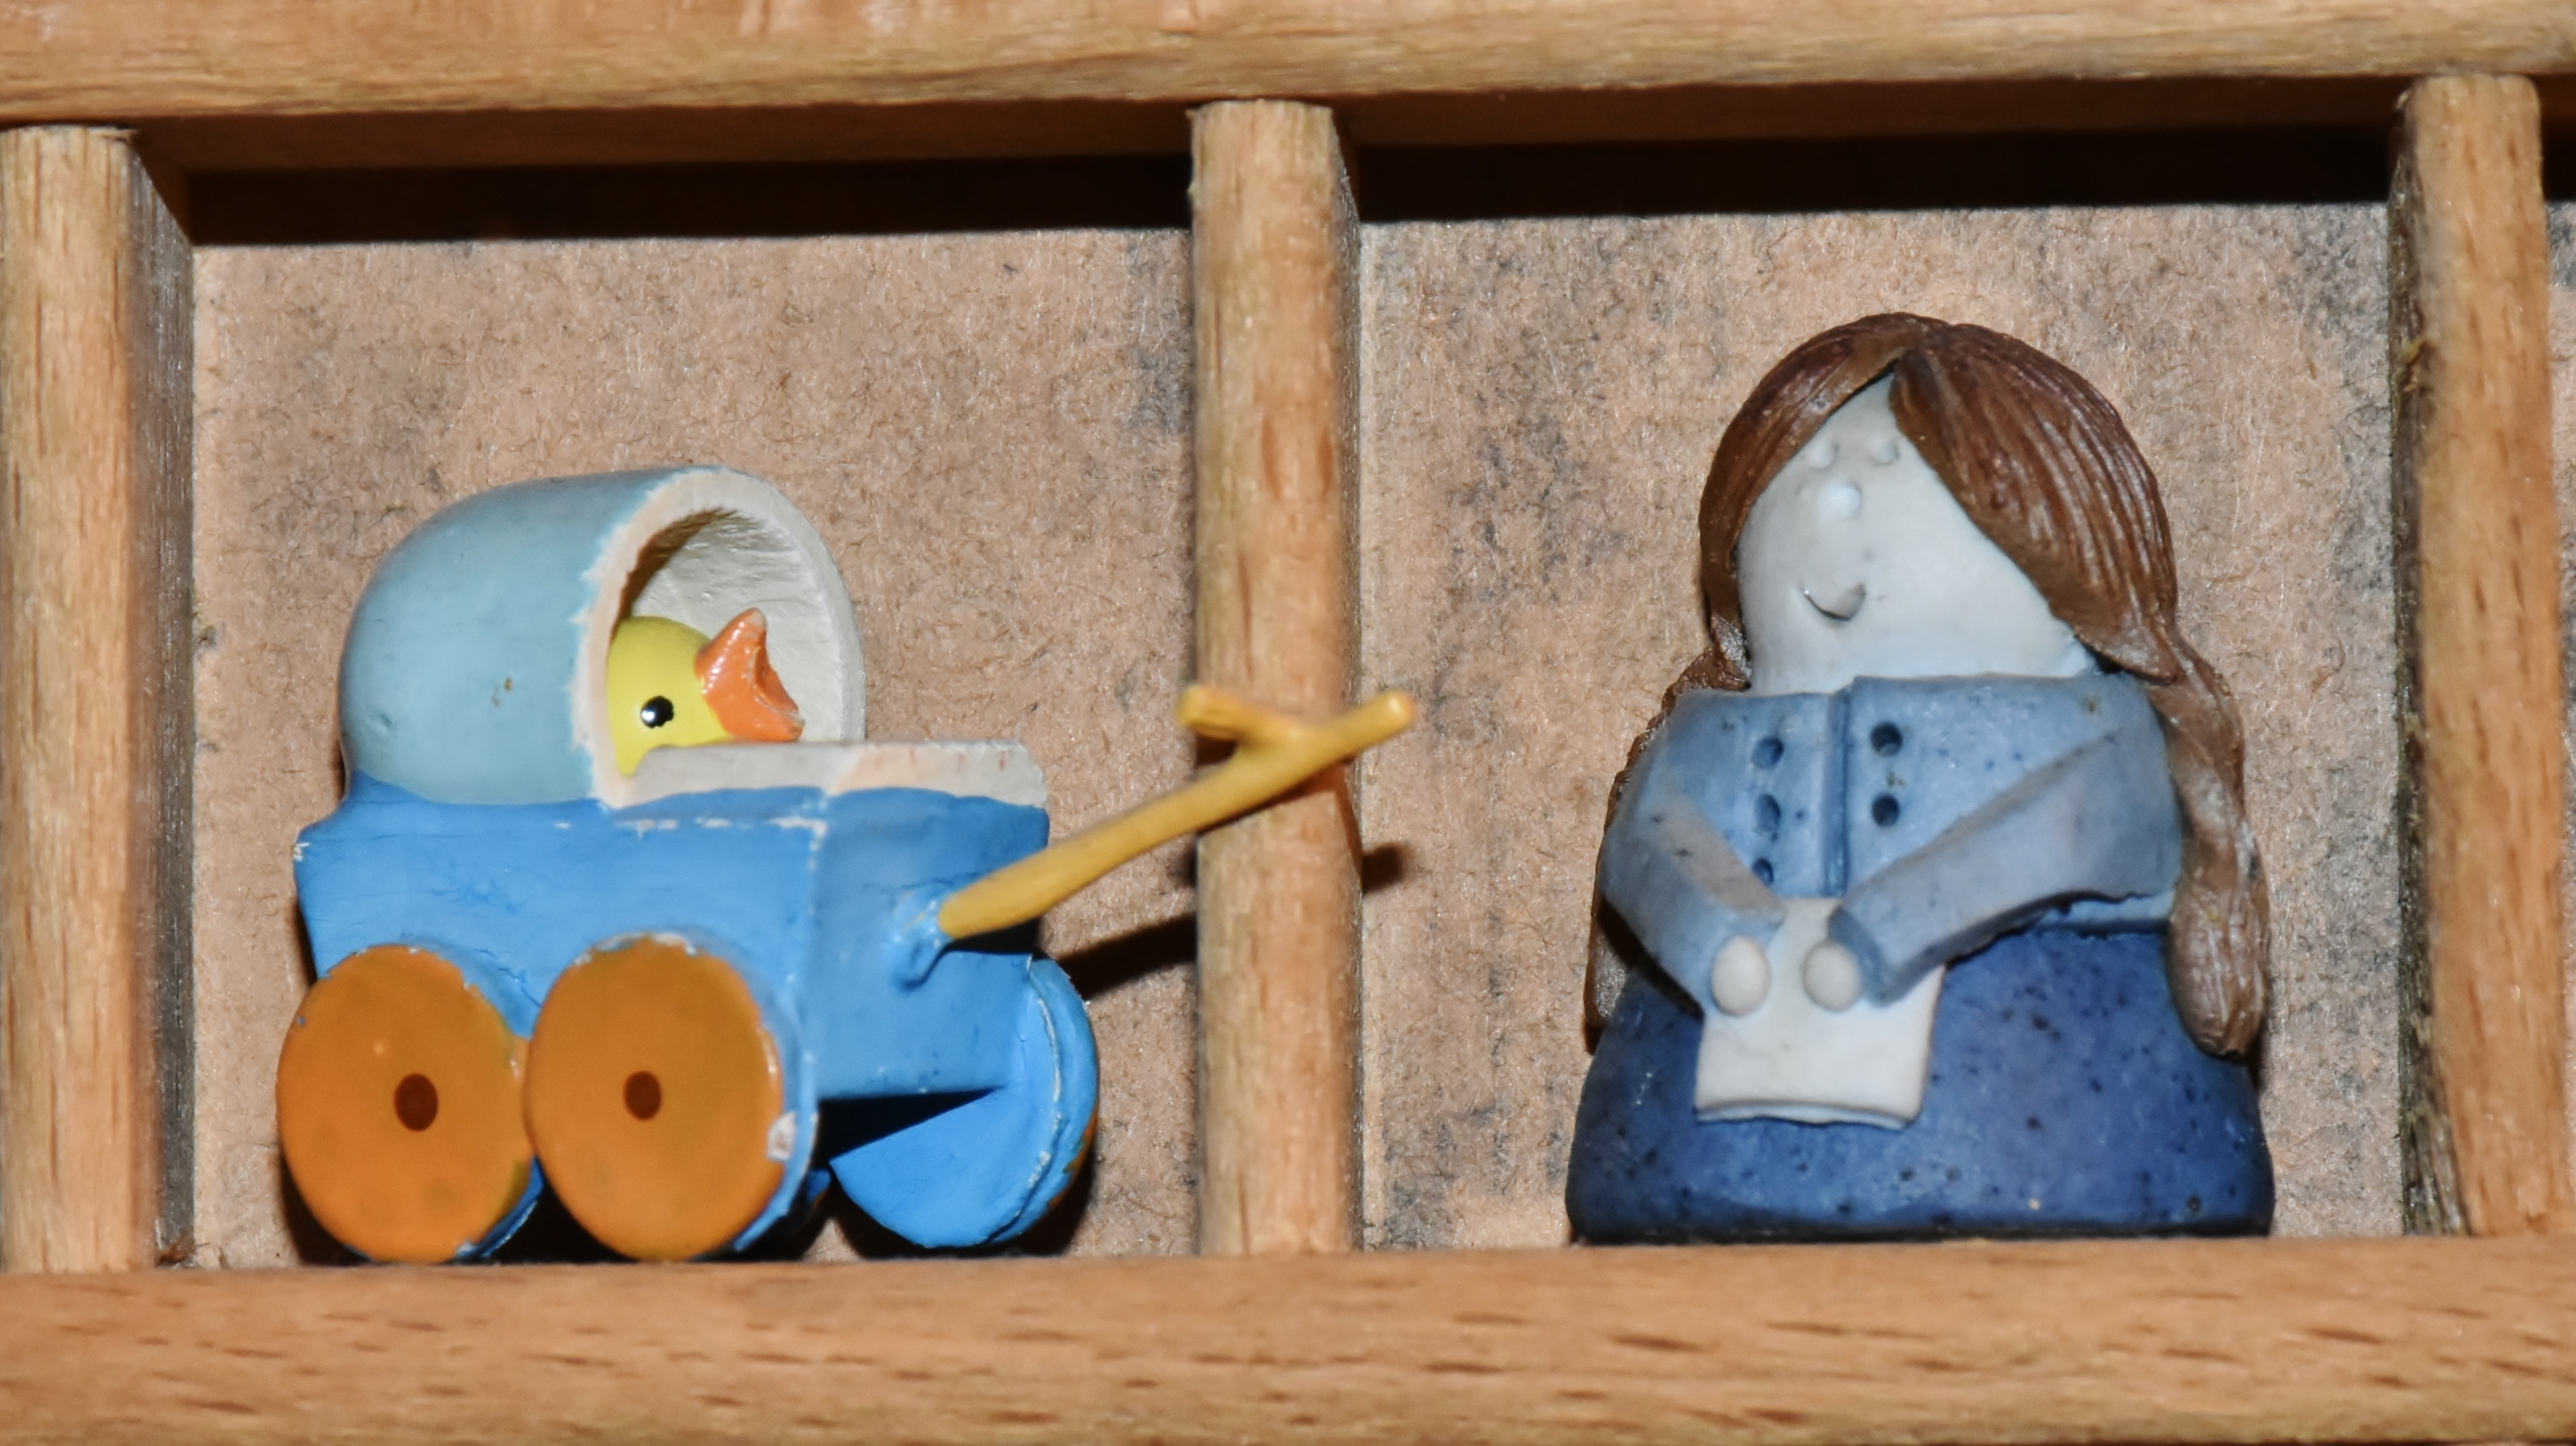 blue duck and woman figurines